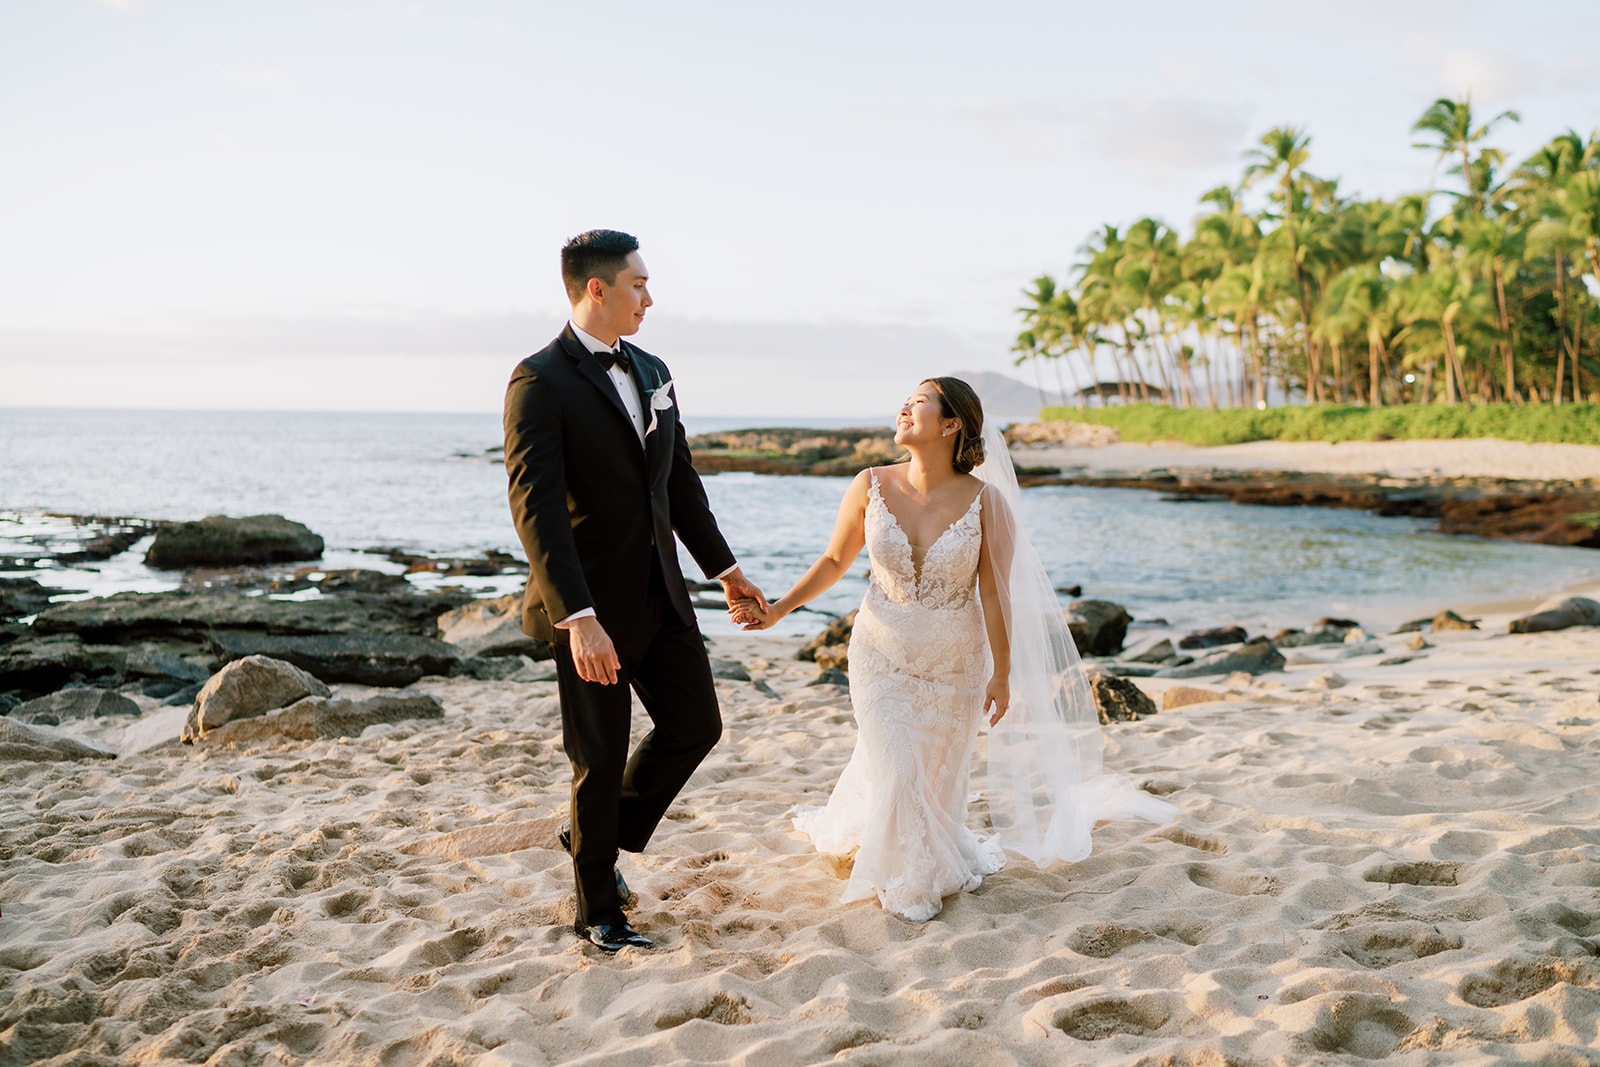 A bride and groom walking on the beach in Oahu